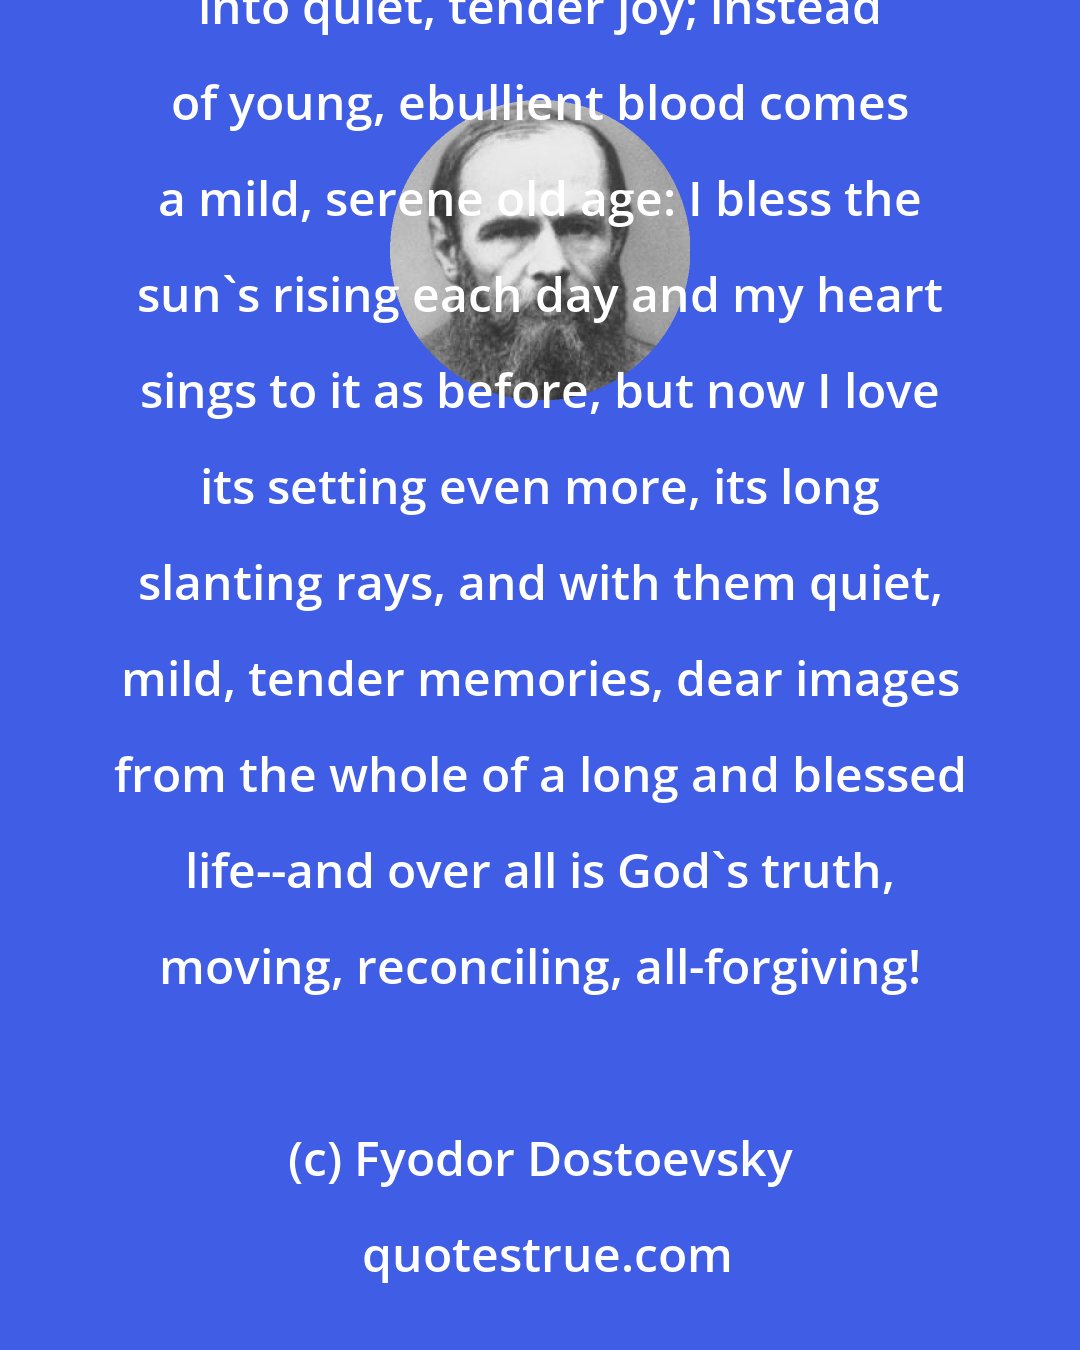 Fyodor Dostoevsky: But it is possible, it is possible: the old grief, by a great mystery of human life, gradually passes into quiet, tender joy; instead of young, ebullient blood comes a mild, serene old age: I bless the sun's rising each day and my heart sings to it as before, but now I love its setting even more, its long slanting rays, and with them quiet, mild, tender memories, dear images from the whole of a long and blessed life--and over all is God's truth, moving, reconciling, all-forgiving!